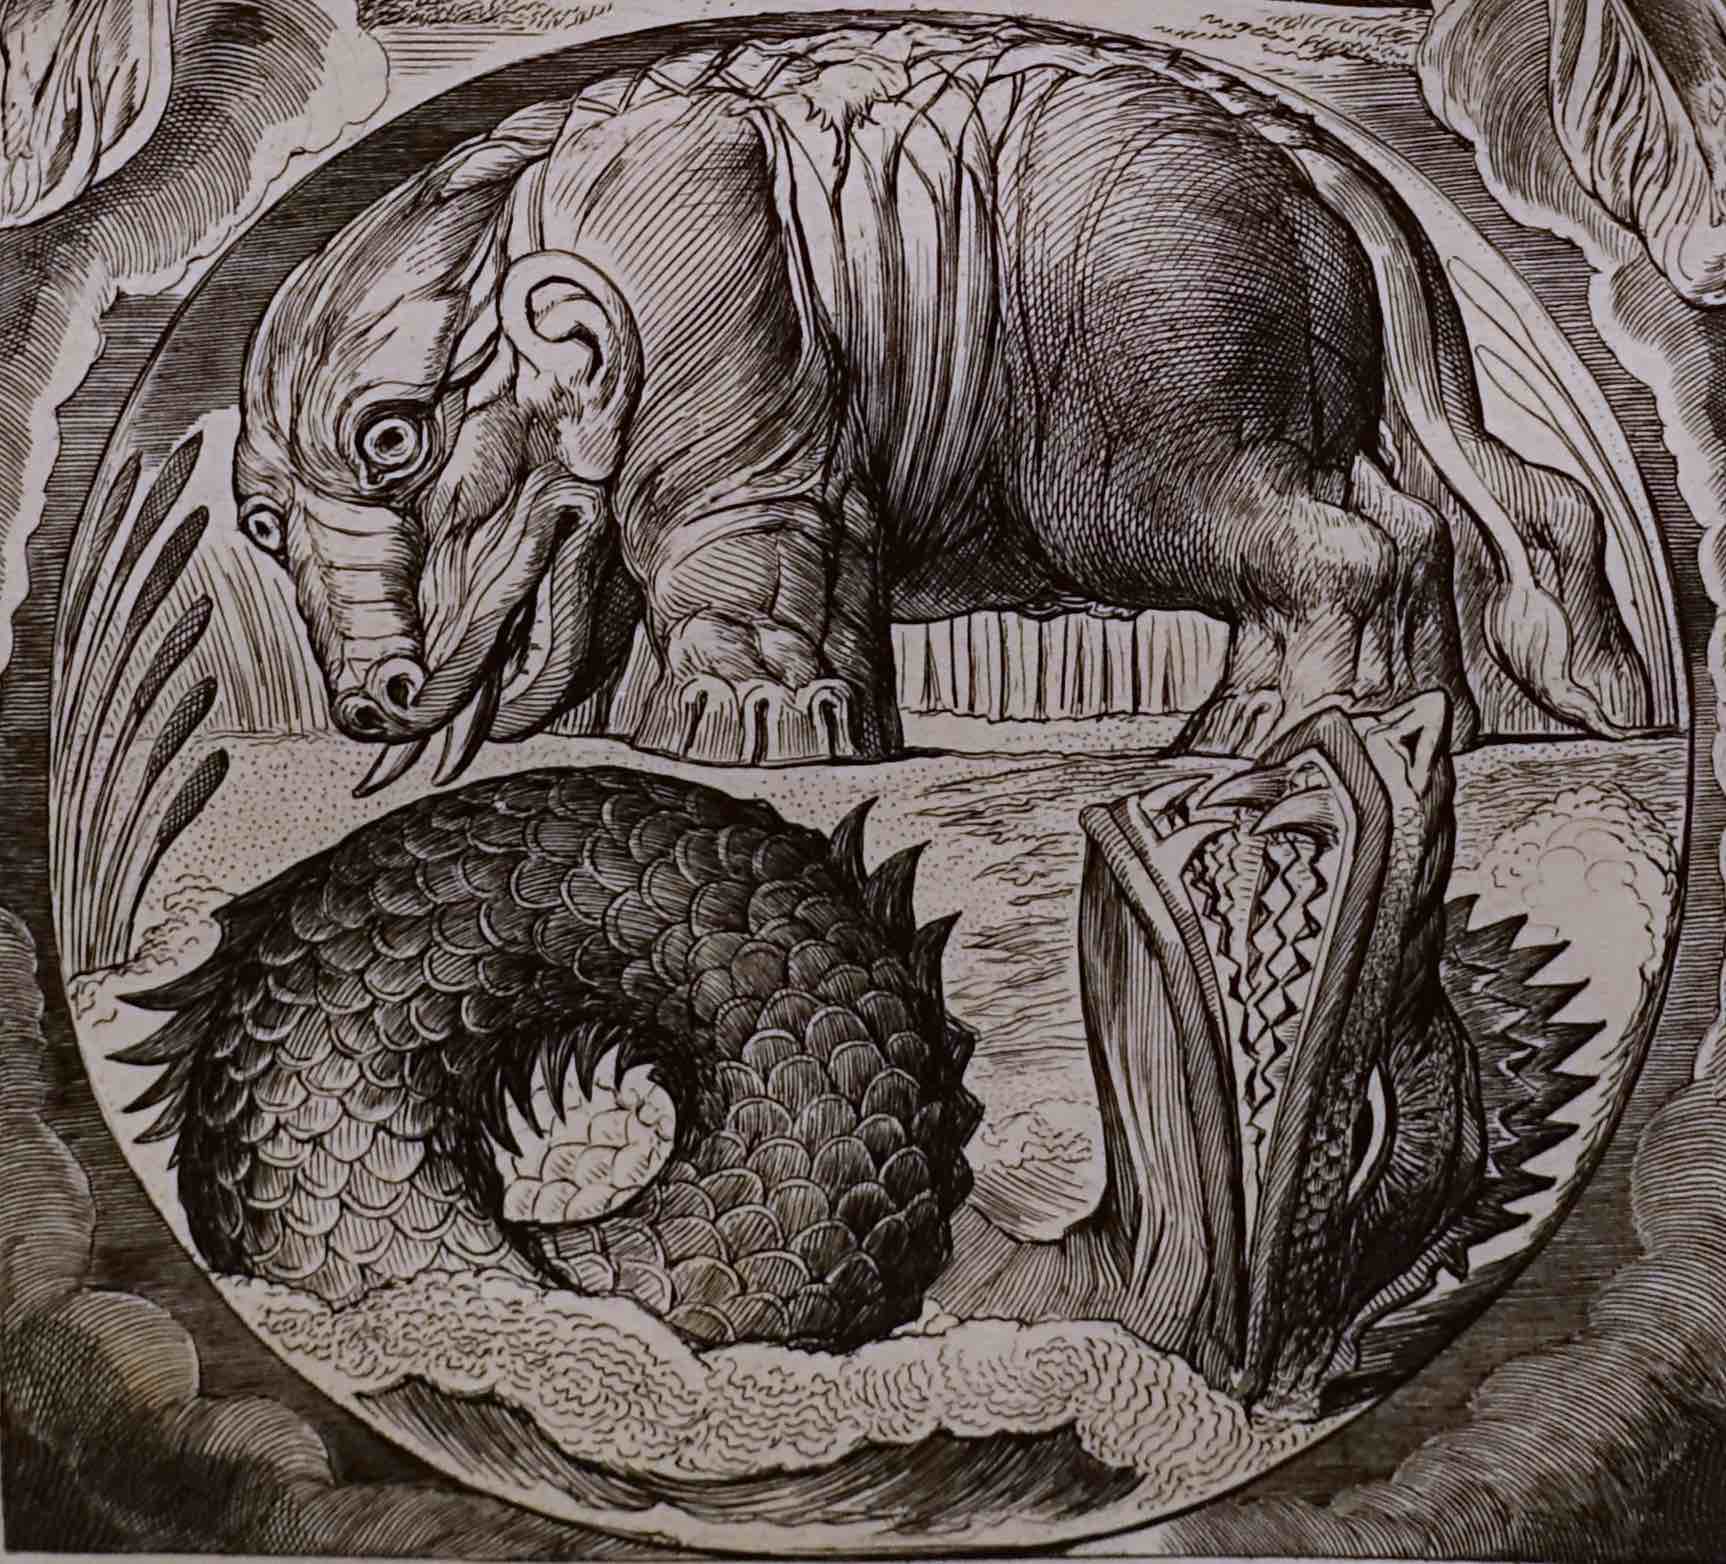 Behometh and Leviathan plate, by William Blake. Illustrations for The Book of Job. c. 1825